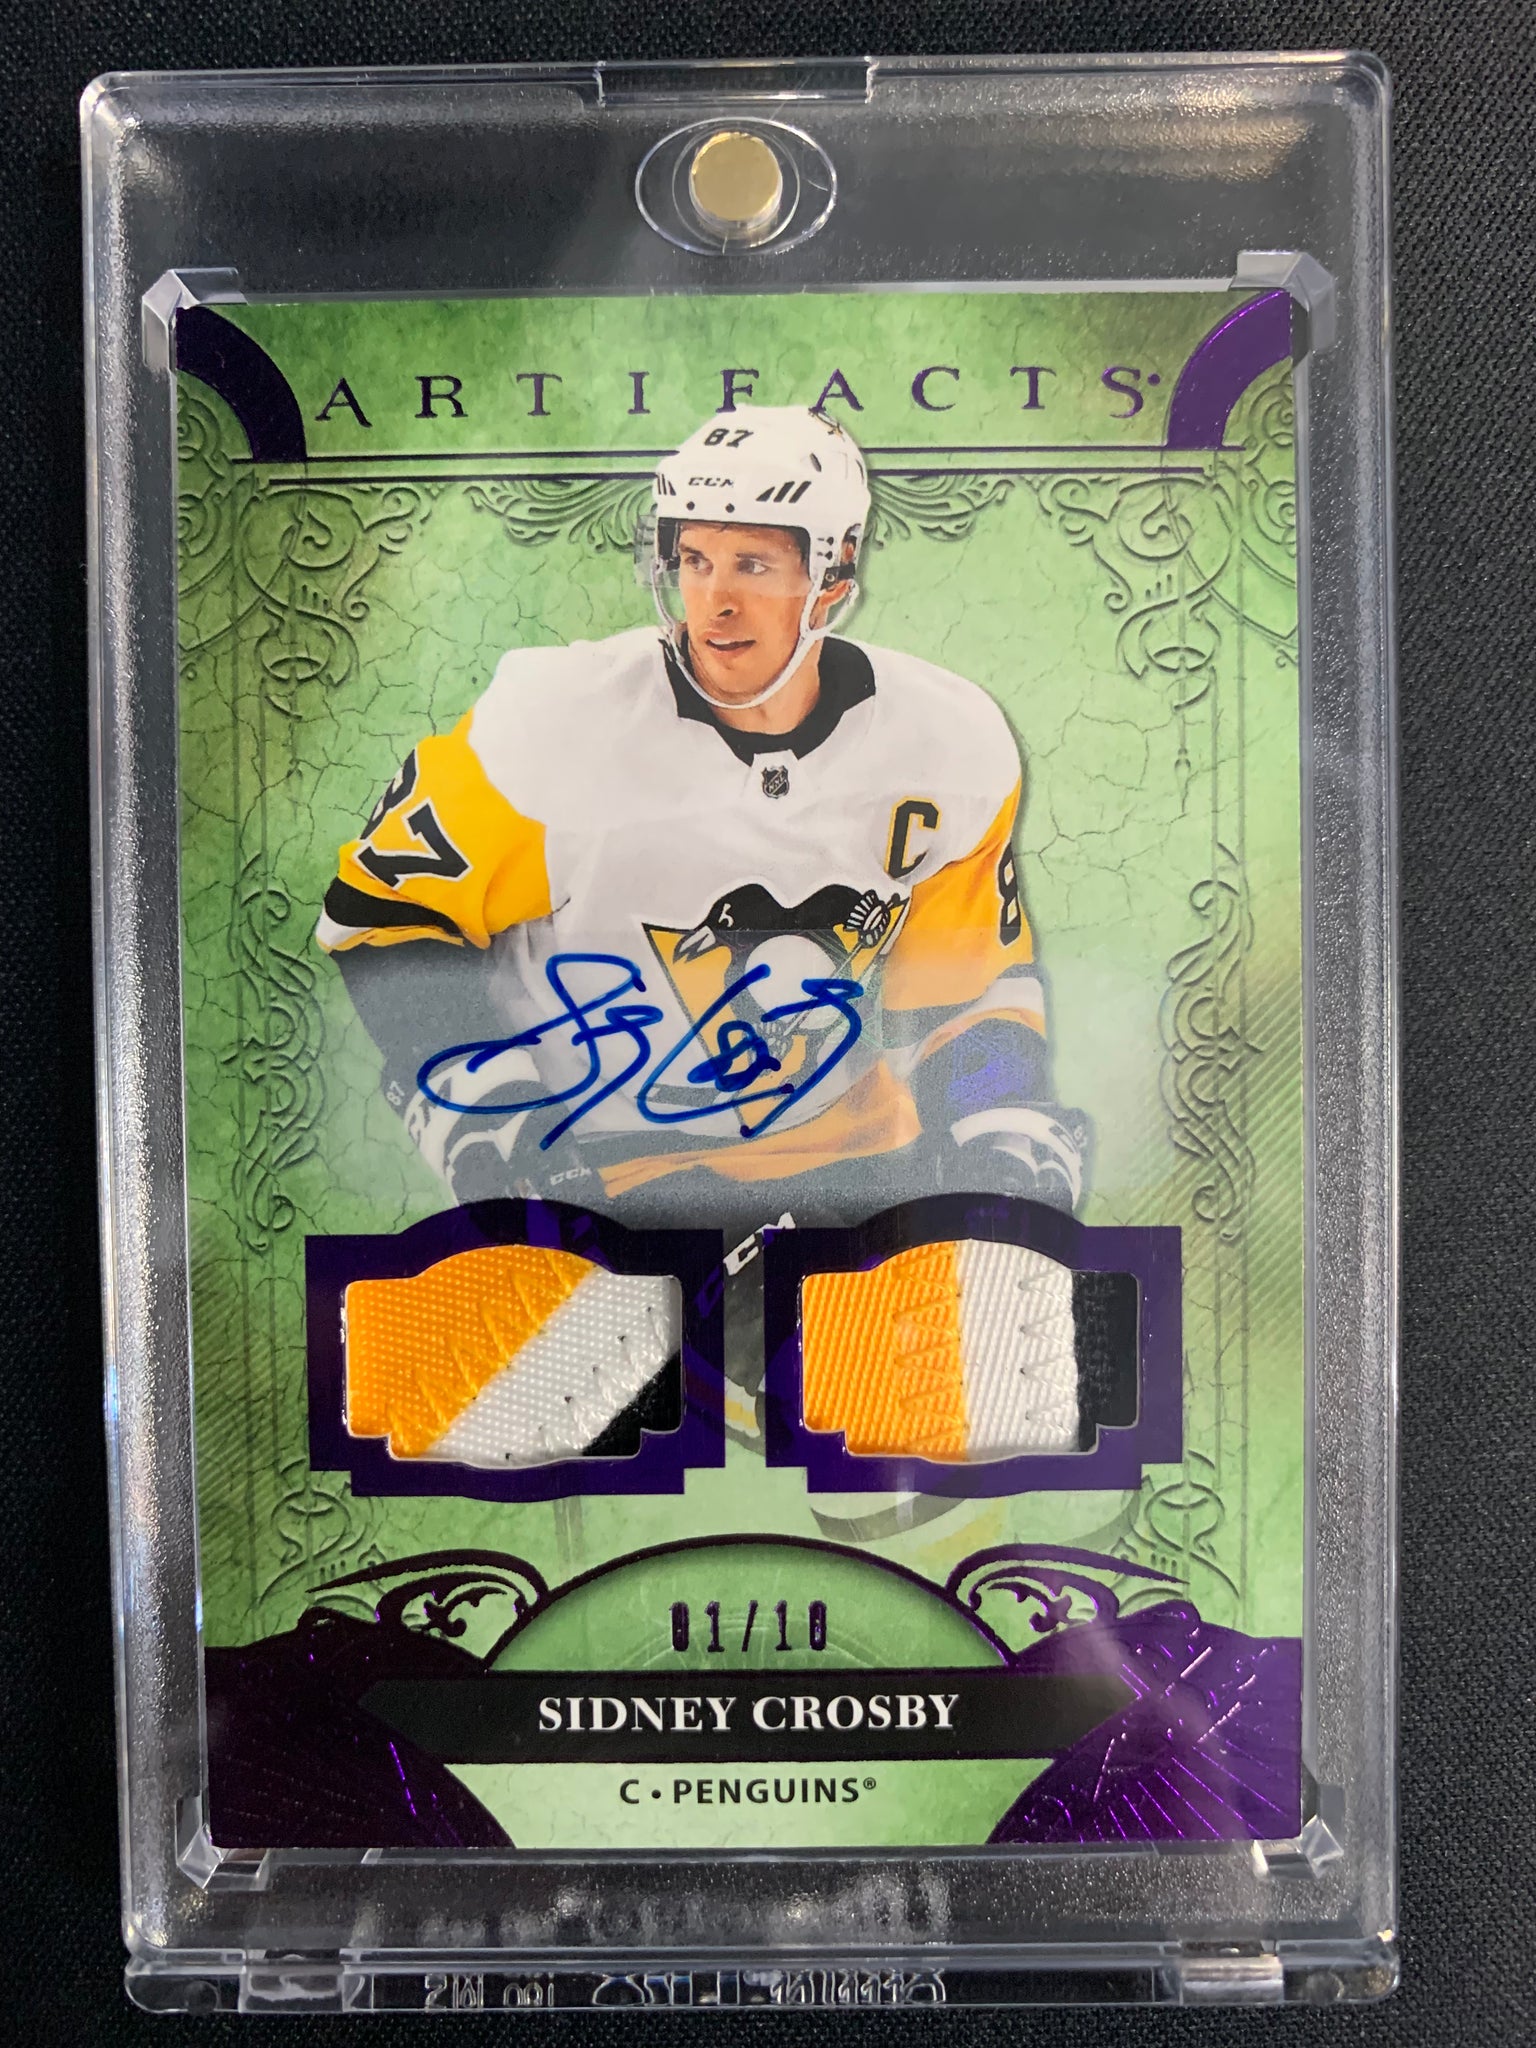 2020-21 UPPER DECK ARTIFACTS HOCKEY #145 PITTSBURGH PENGUINS - SIDNEY CROSBY ARTIFACTS DOUBLE PATCH AUTO NUMBERED 01/10